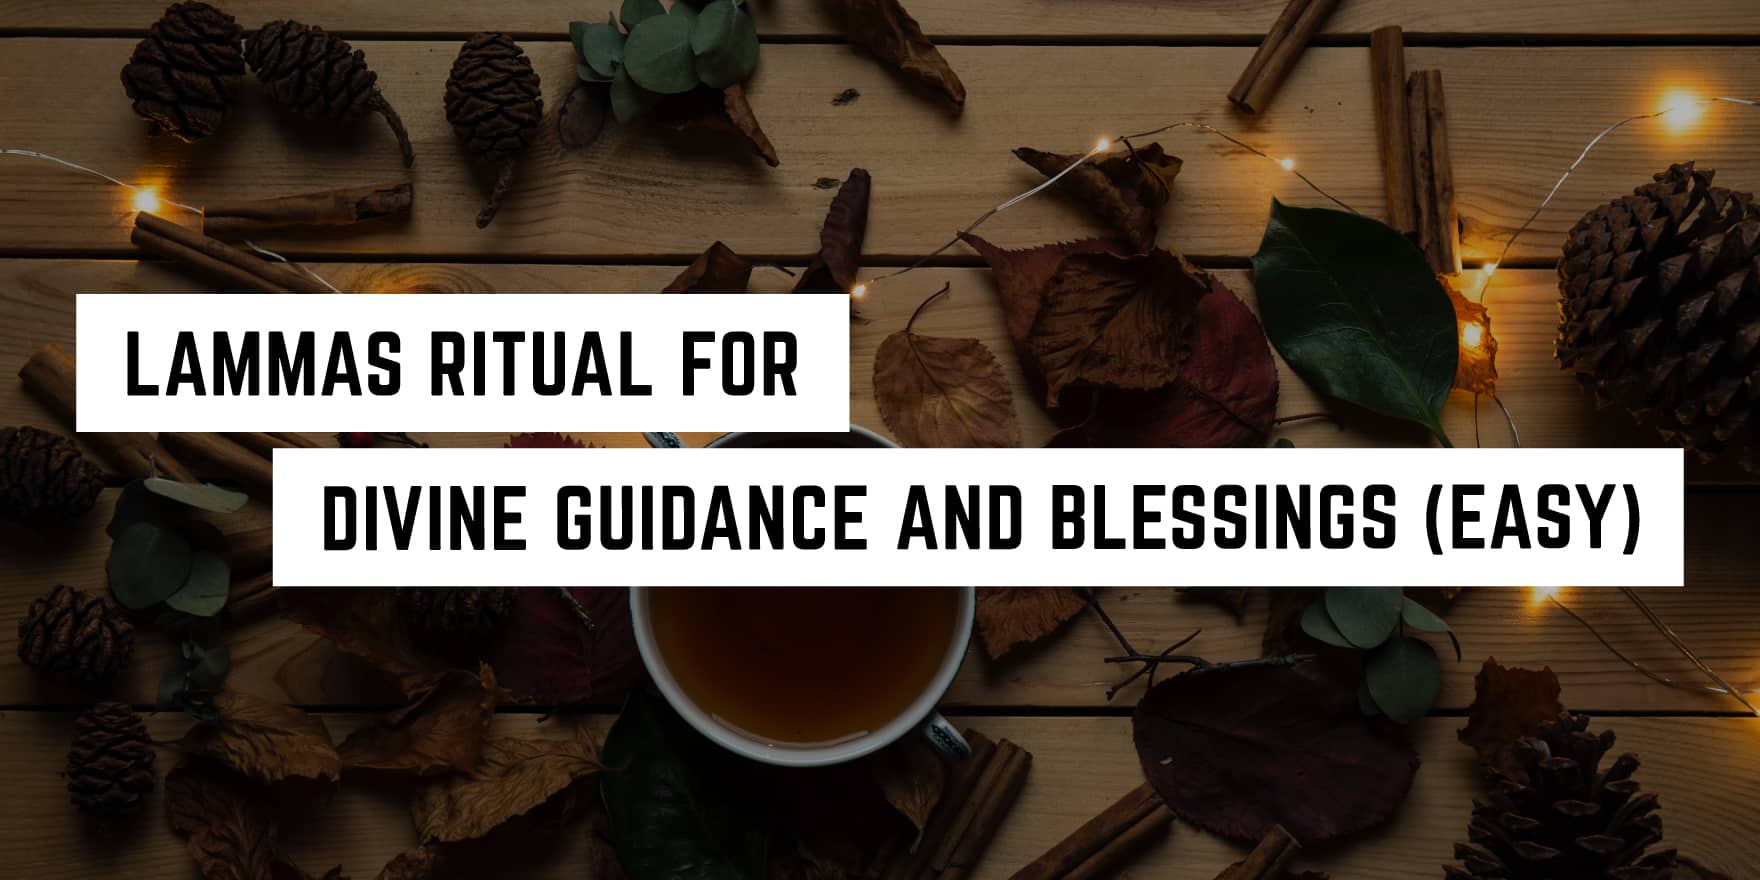 Rustic autumnal setting with warm fairy lights, pine cones, and leaves surrounding a cup of tea, with text overlay "spiritual lammas ritual for divine guidance and blessings (easy).